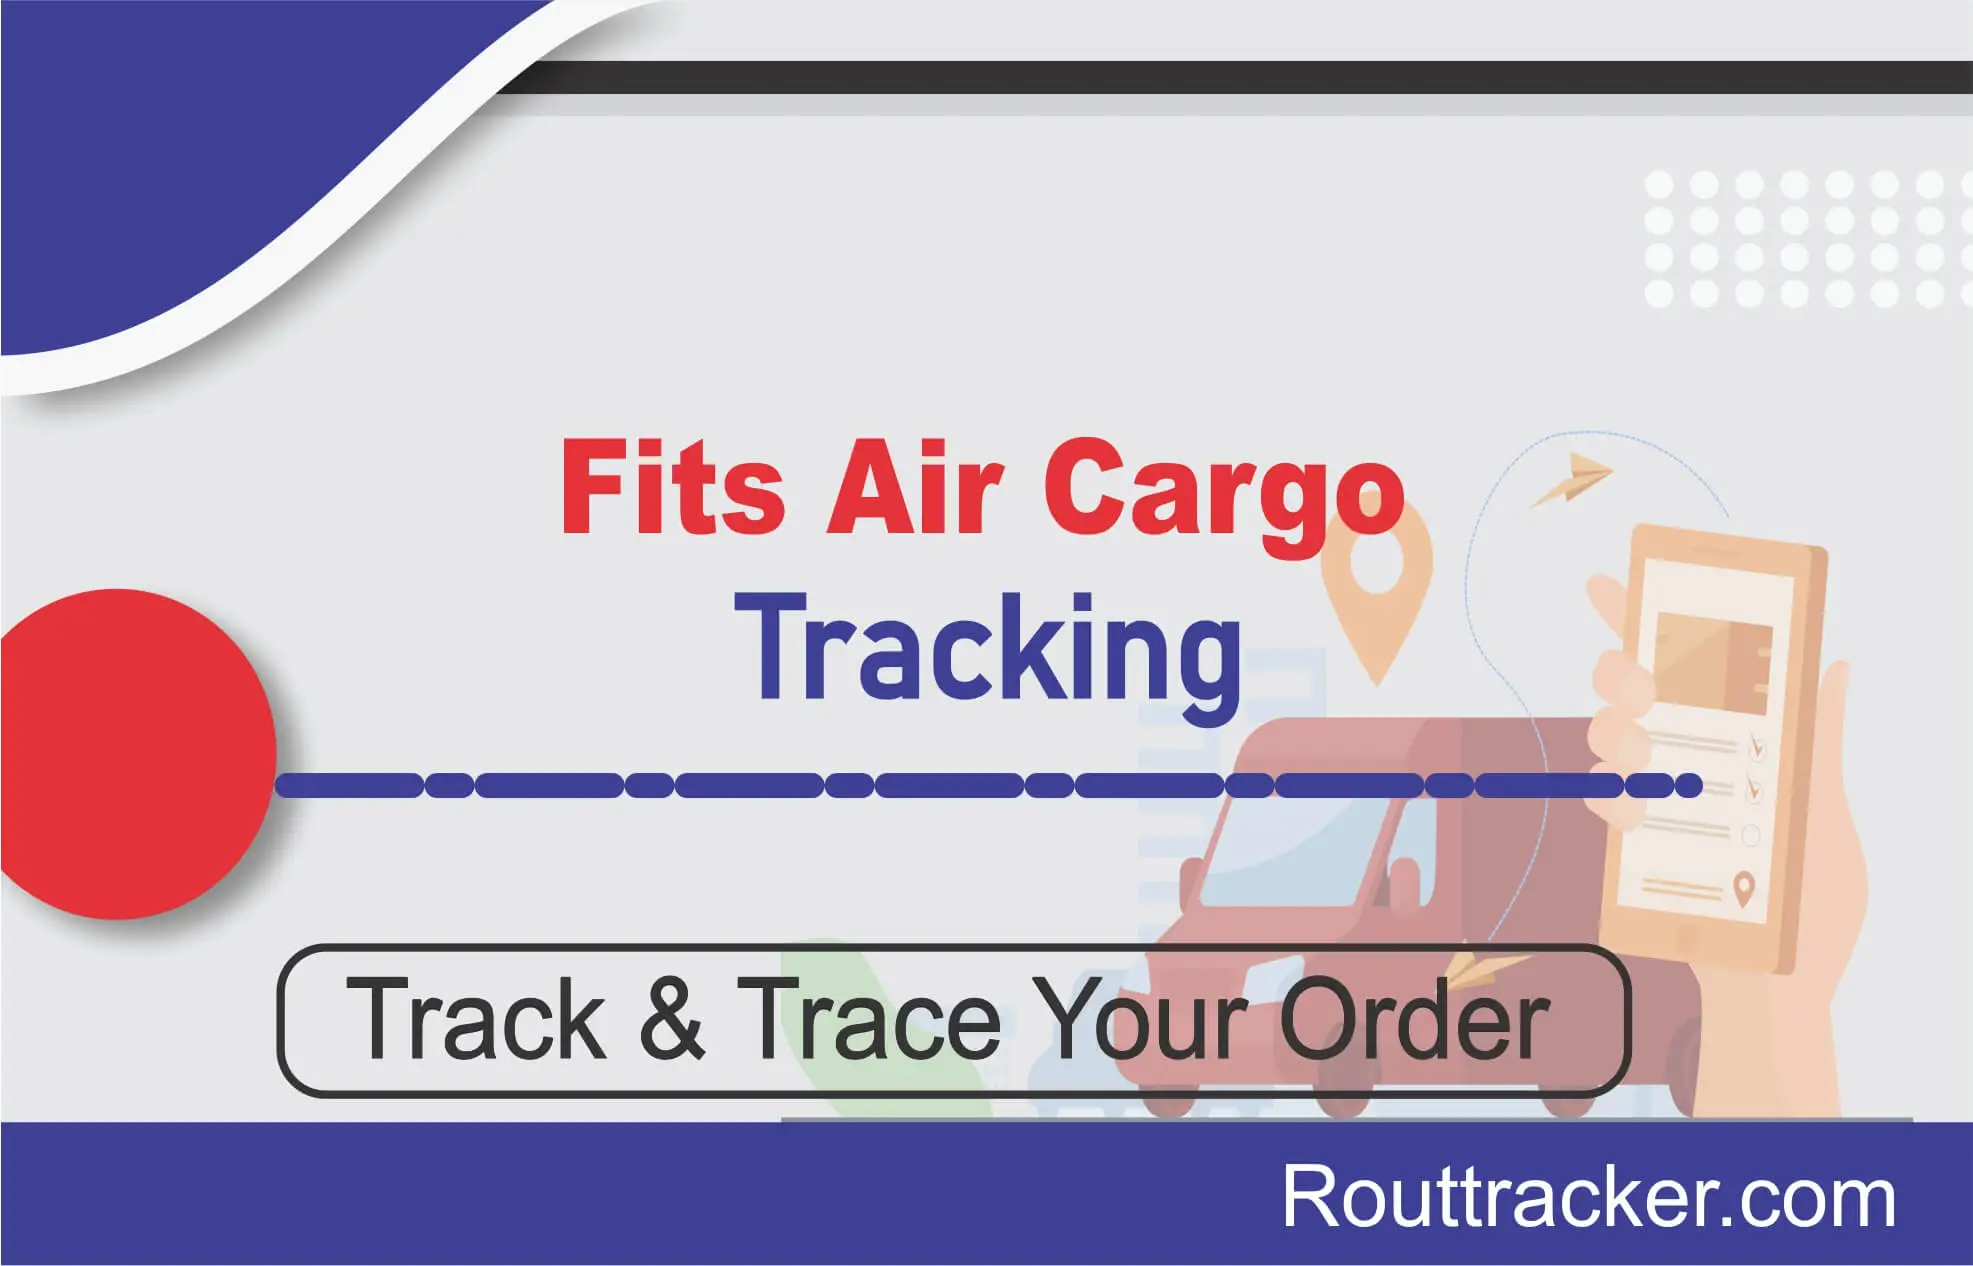 Fits Air Cargo Tracking